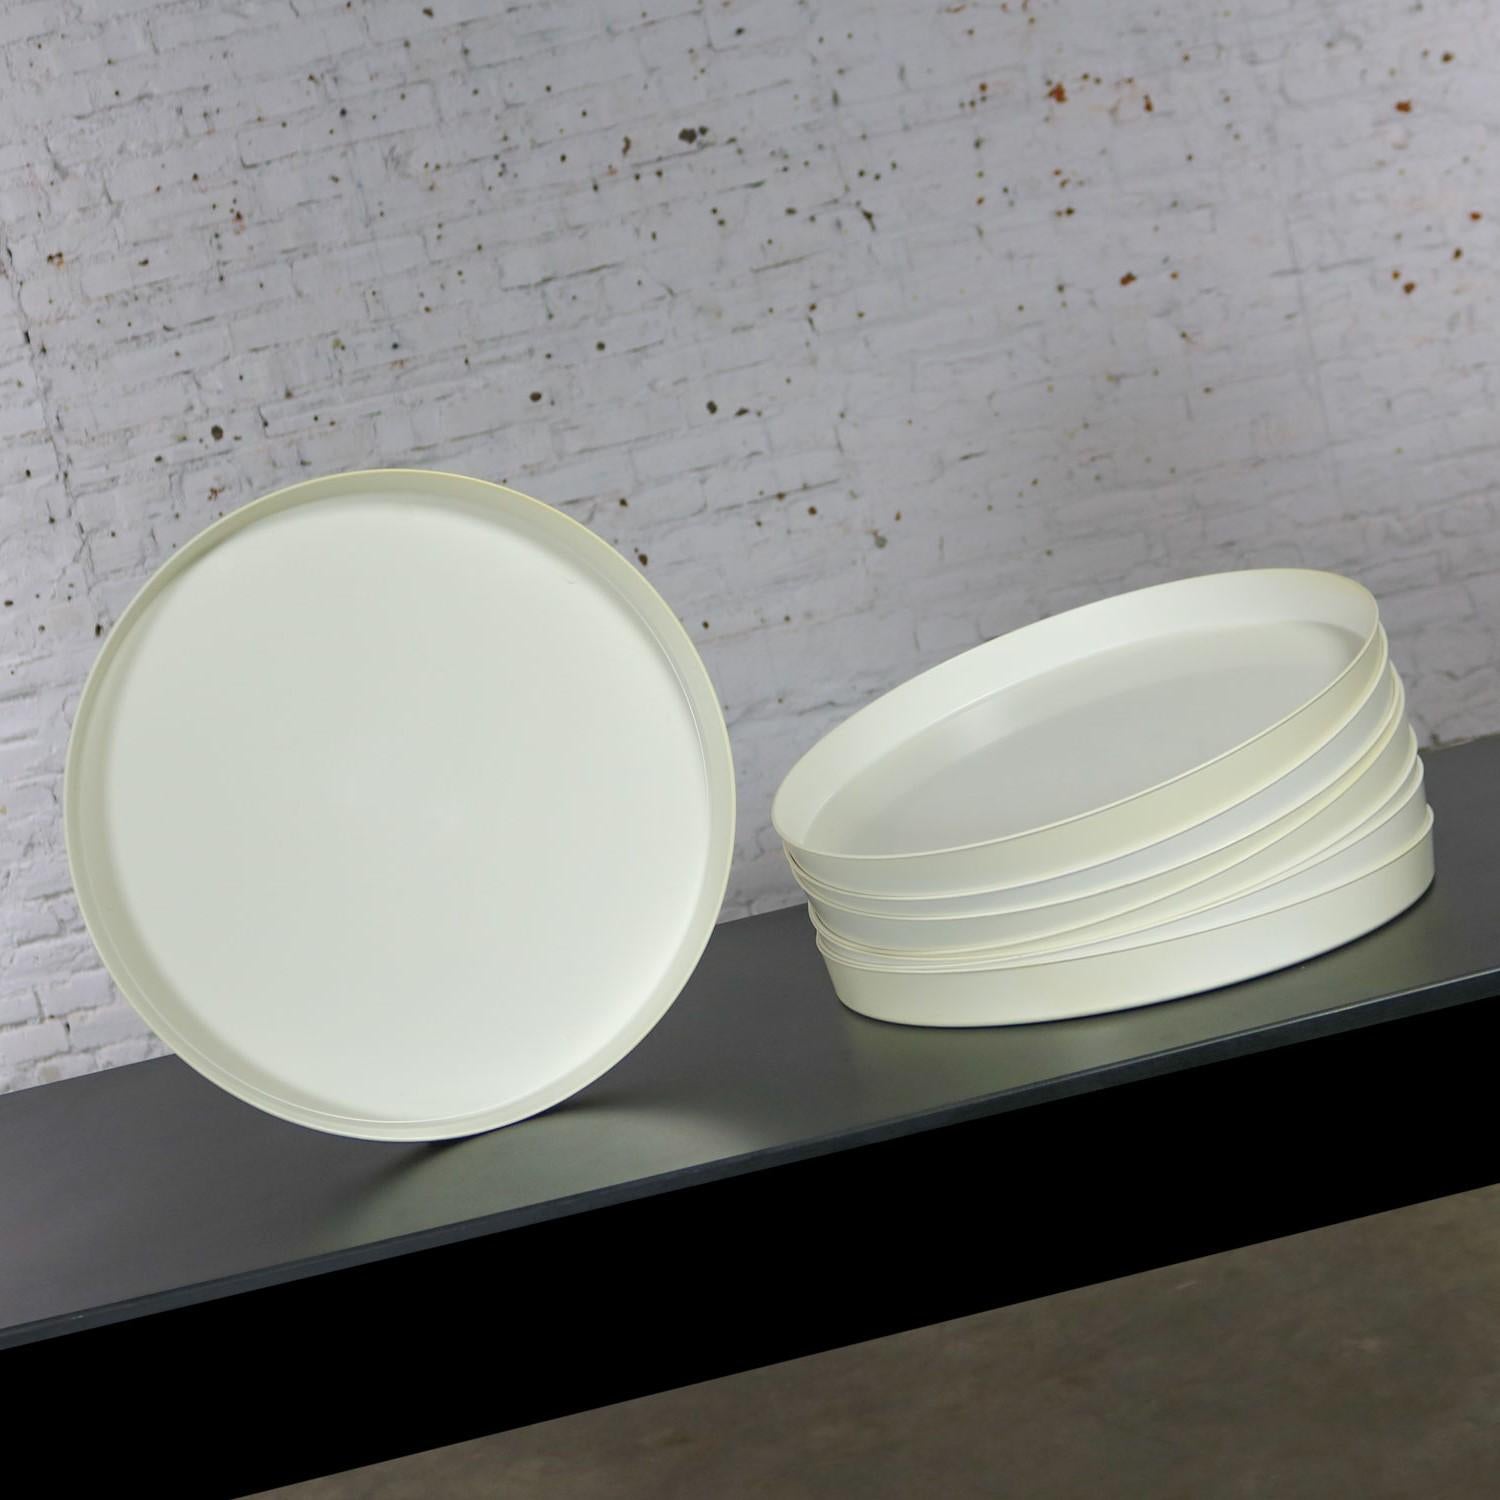 American Mid-Century Modern Trays Round White Plastic Splatter Platters by Sabe’s For Sale